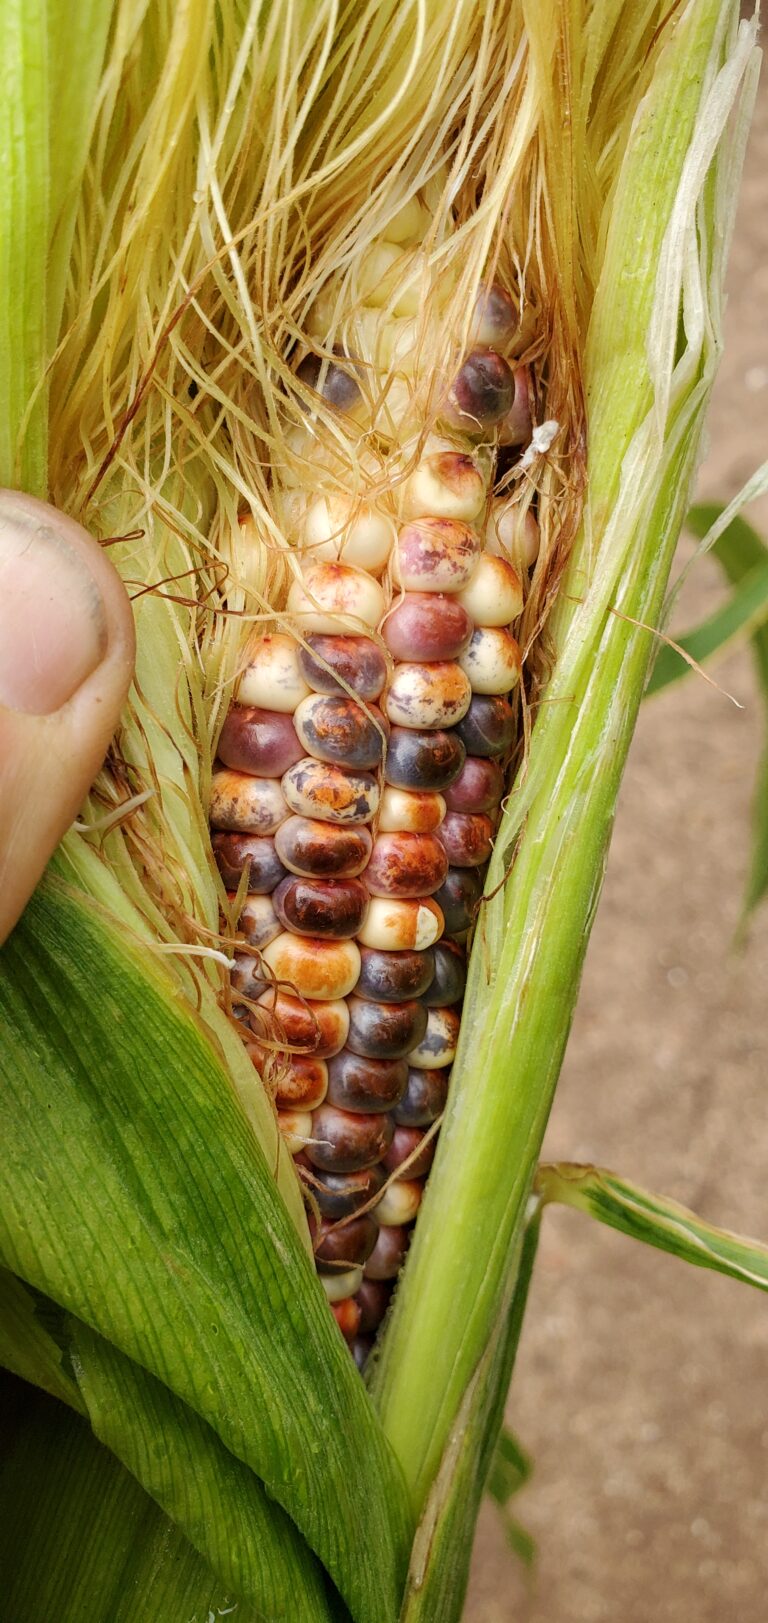 Preview of corn to come